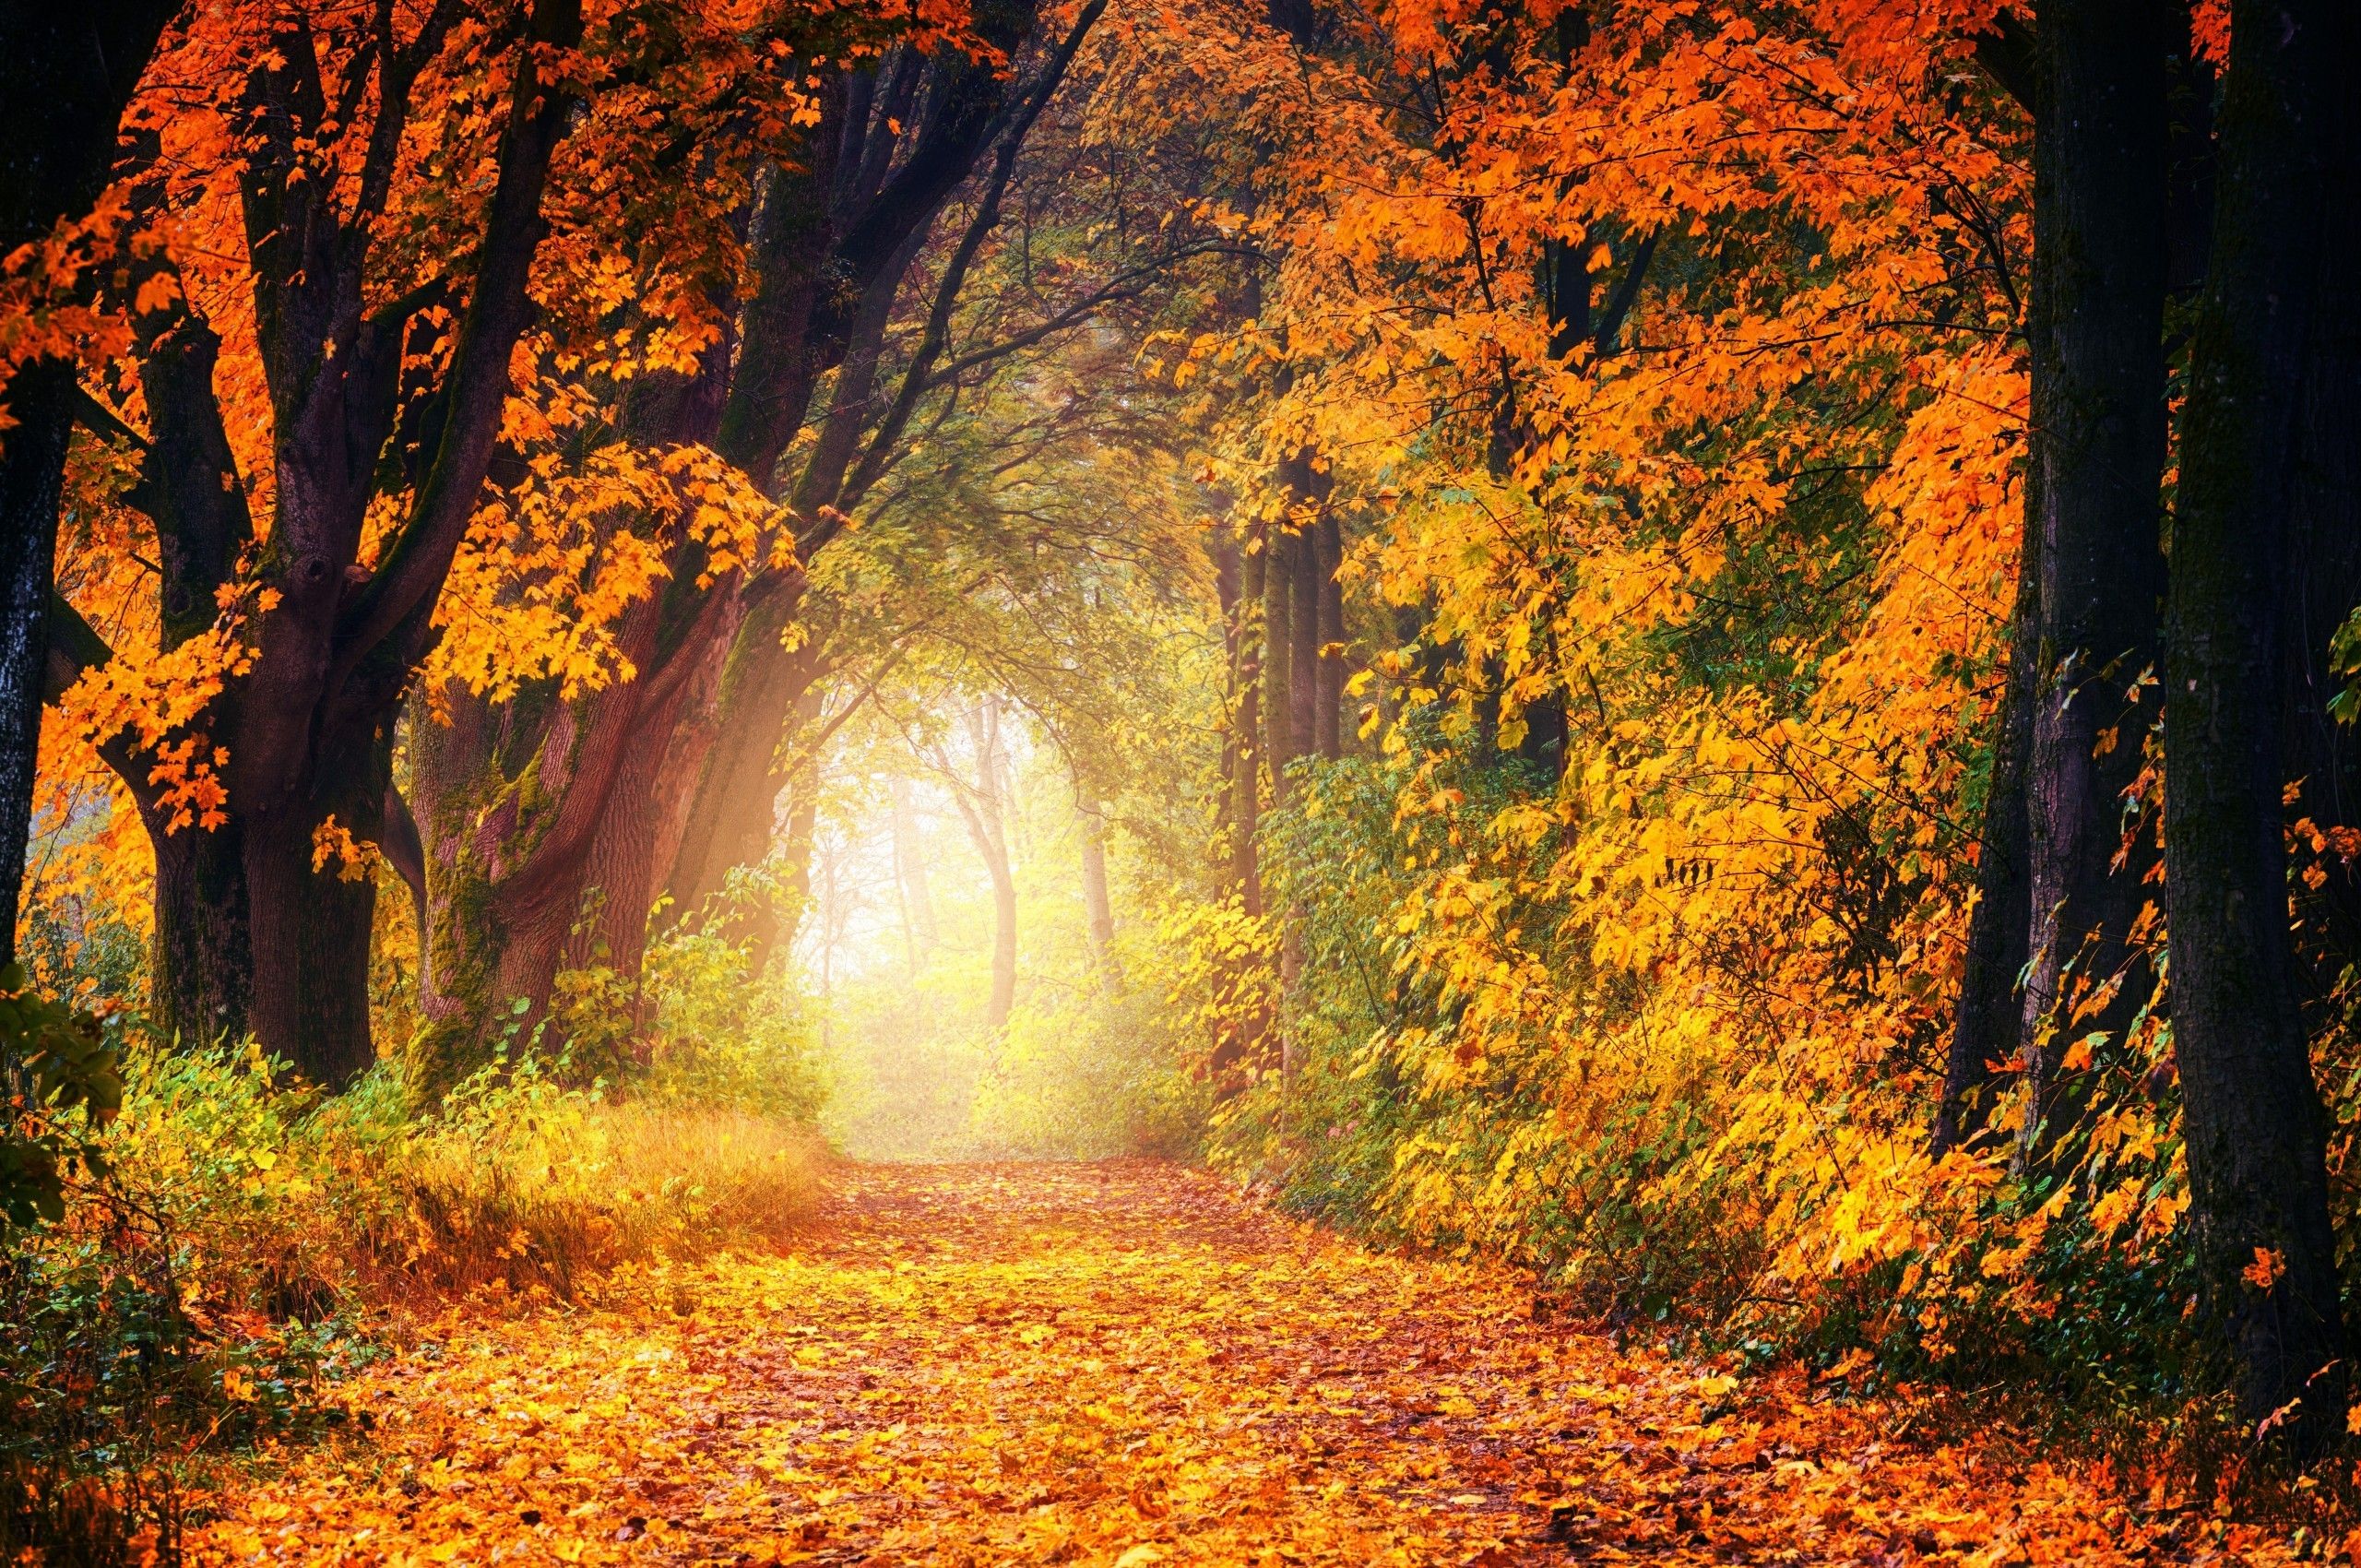 Download 2560x1700 Path, Autumn, Fall, Trees, Forest, Scenery, Cozy Wallpaper for Chromebook Pixel